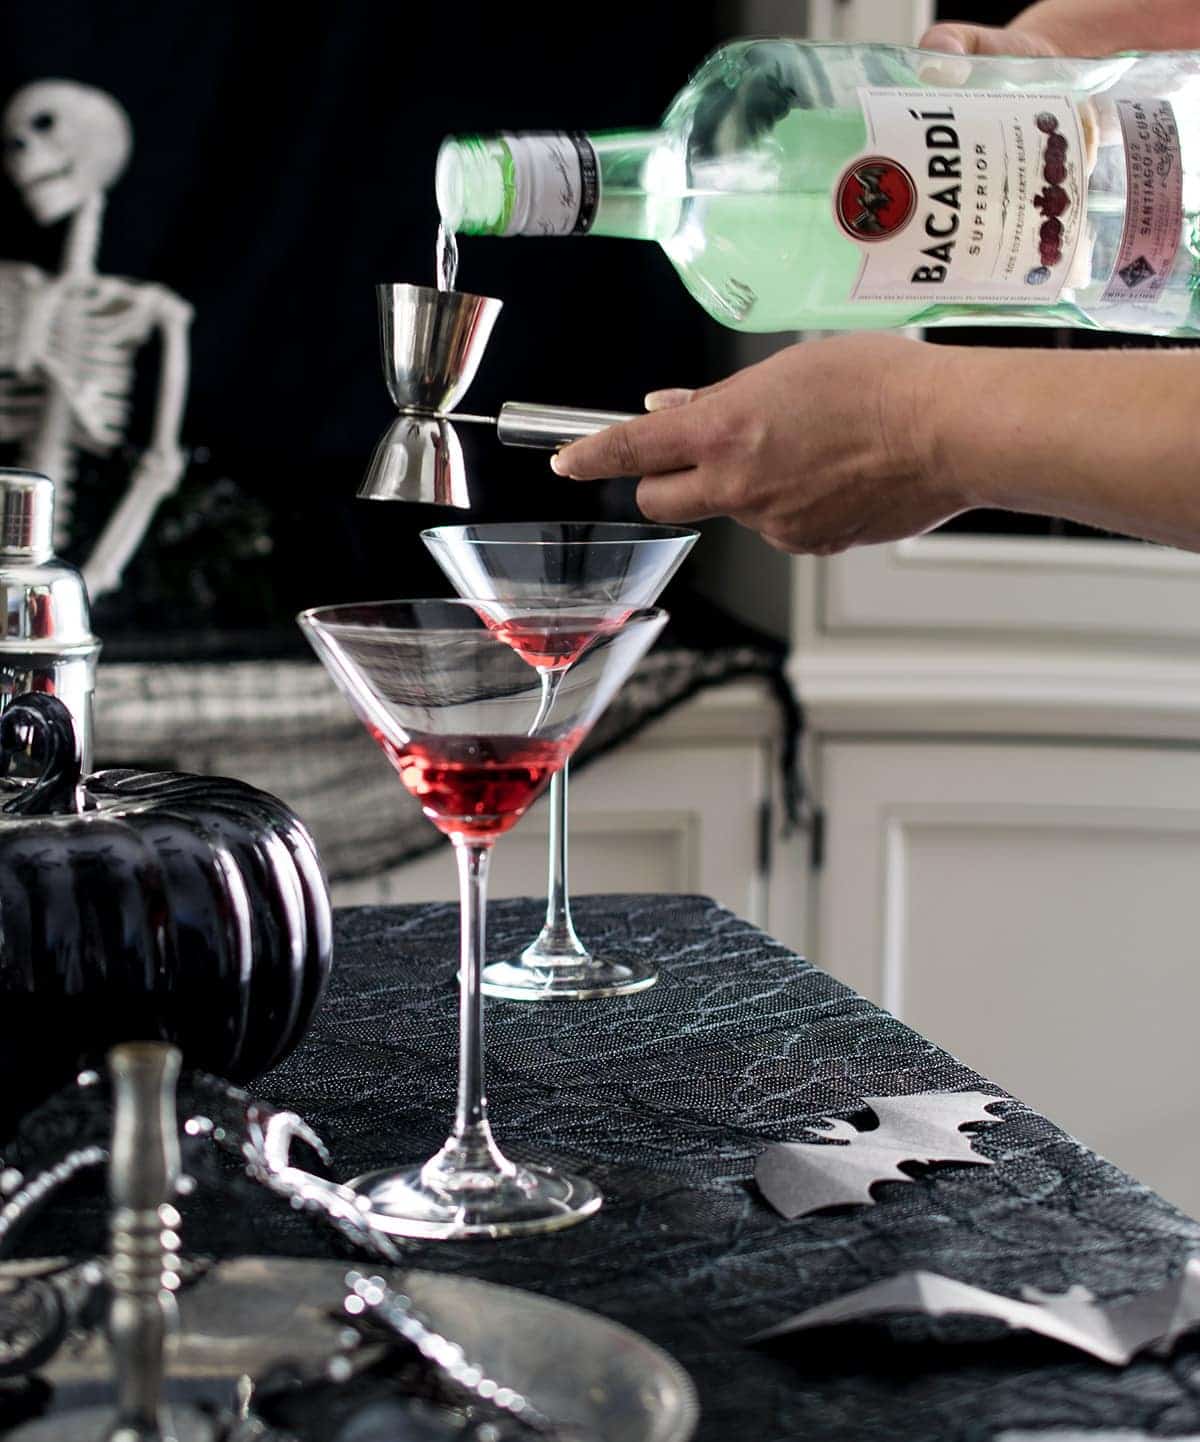 Making a layered cocktail by pouring rum in  jigger over grenadine in a martini glass.